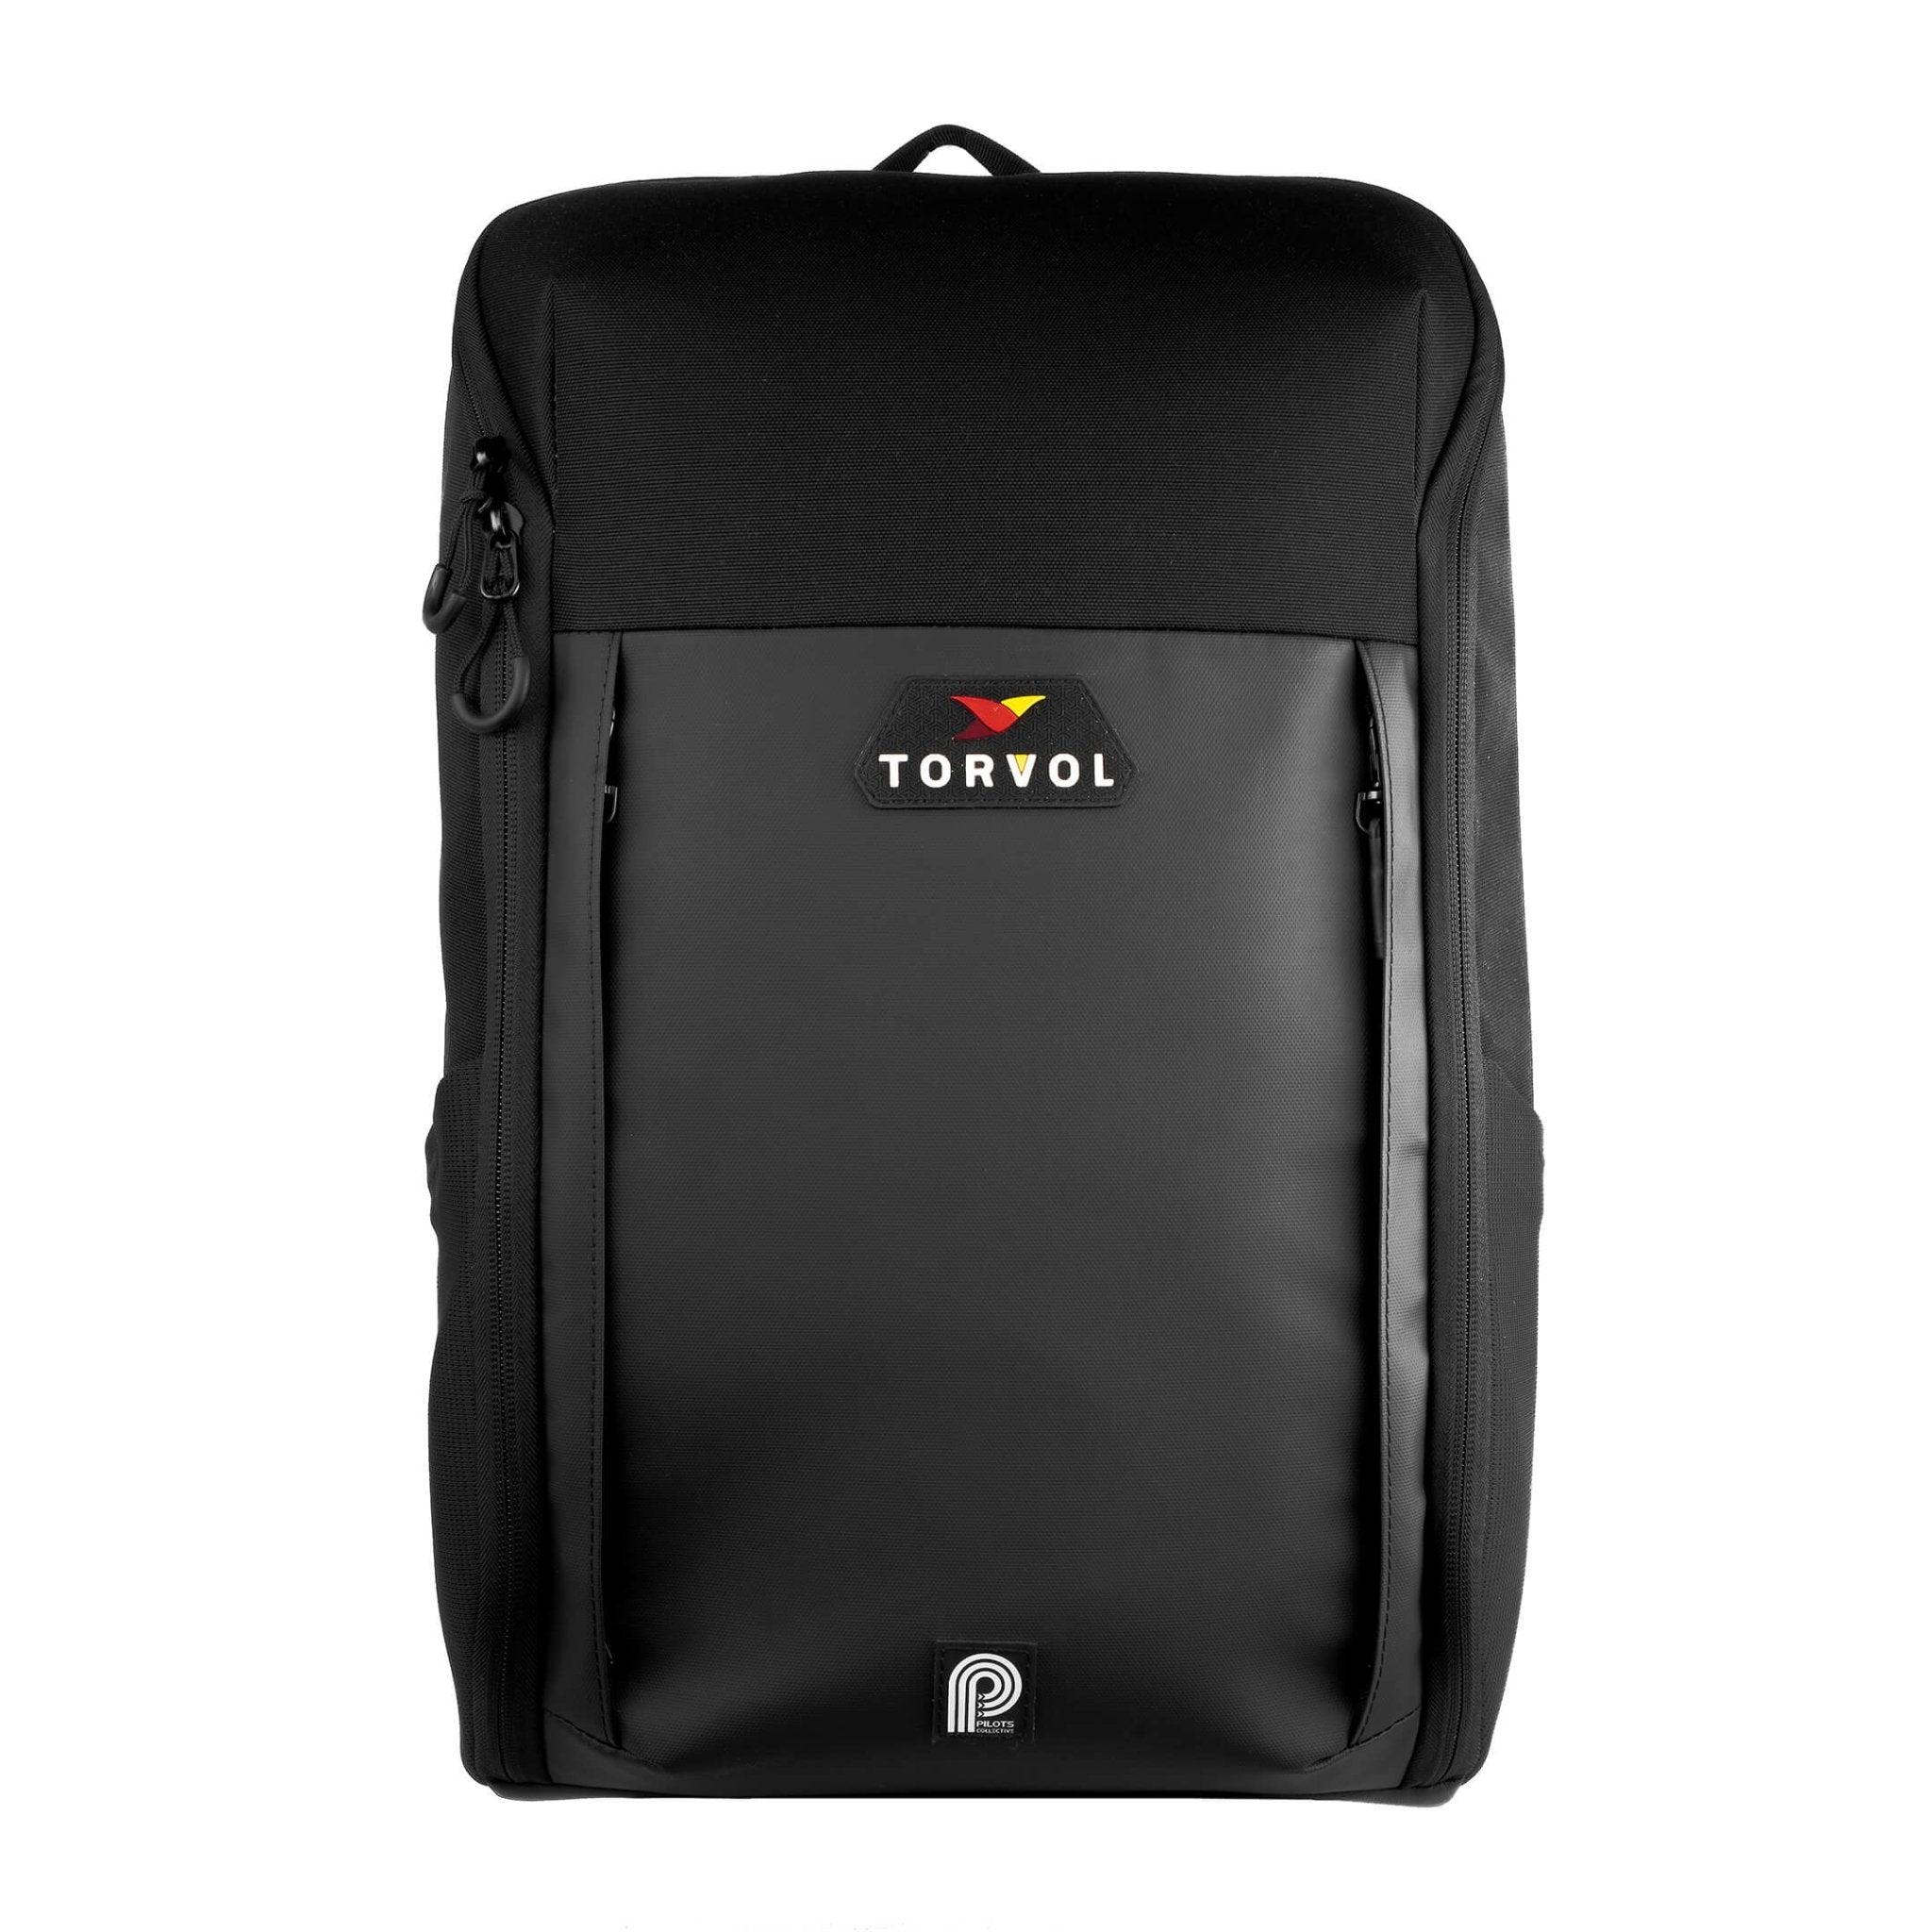 Torvol Urban Backpack - The Ultimate Daily Backpack 4 - Torvol - Drone Authority